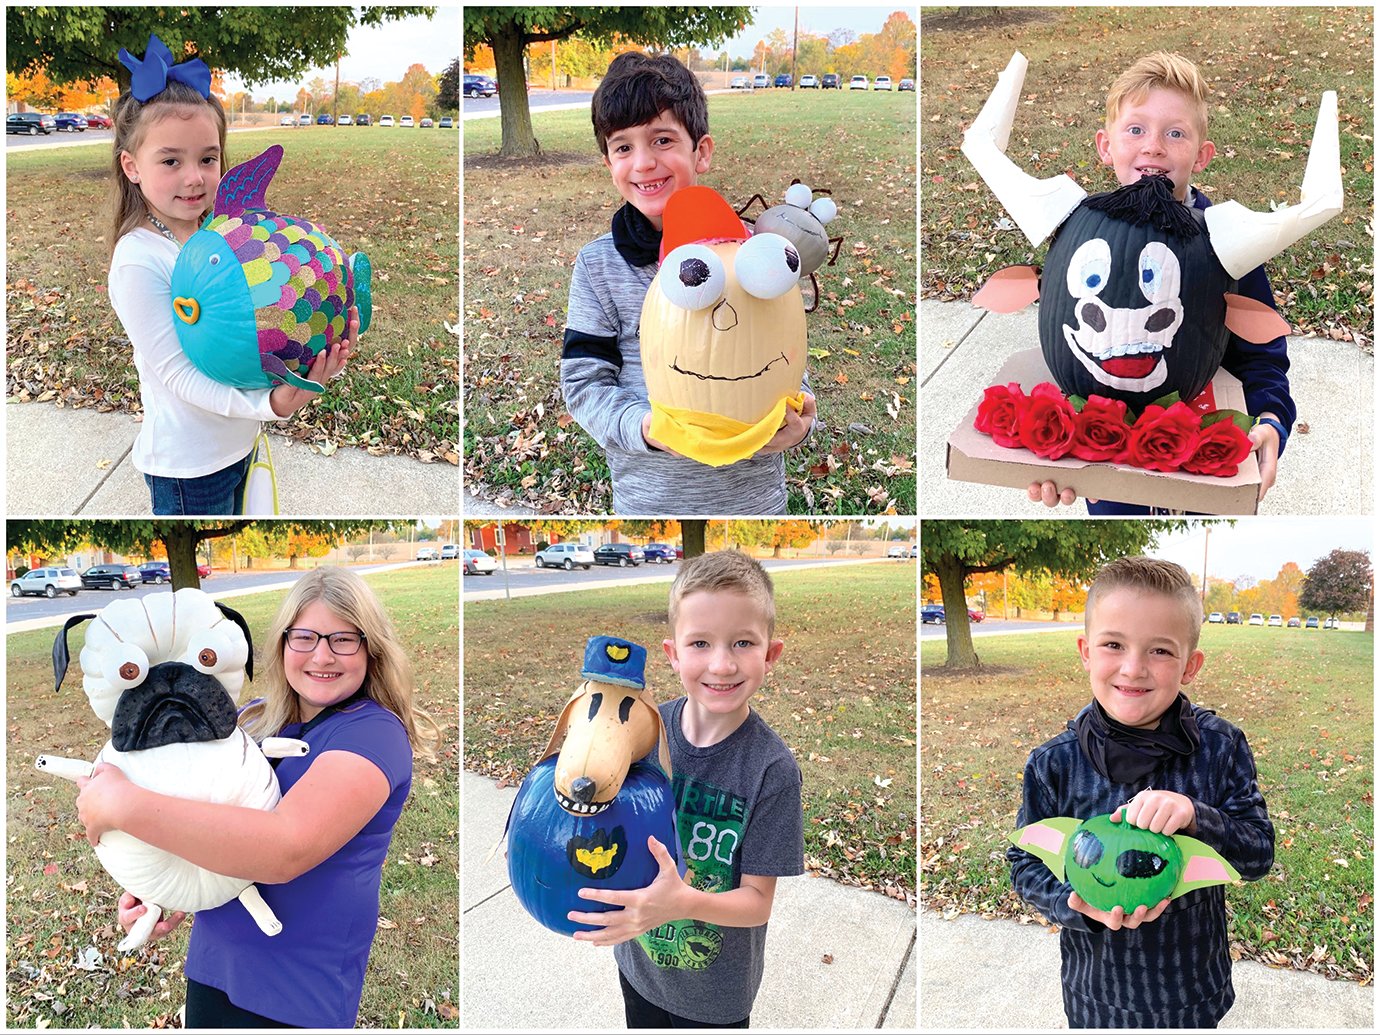 Winners of New Market Elementary's fall pumpkin painting contest proudly display their creative works of art Wednesday in front of the school. More than 150 pumpkins were submitted for the contest.  Champions were voted upon by their peers in each grade level. Winners, clockwise from top left, include: Kindergartener Kynlee Cleary with her fish; first grader McCoy Gomez with Fly Guy and Buzz; second grader Harrison Simmons with Ferdinand; third grader Hudson Beach with Yoda; fourth grader Colton Kendricks with Dog Man; and fifth grader Molly Slavens with Pig the Pug.